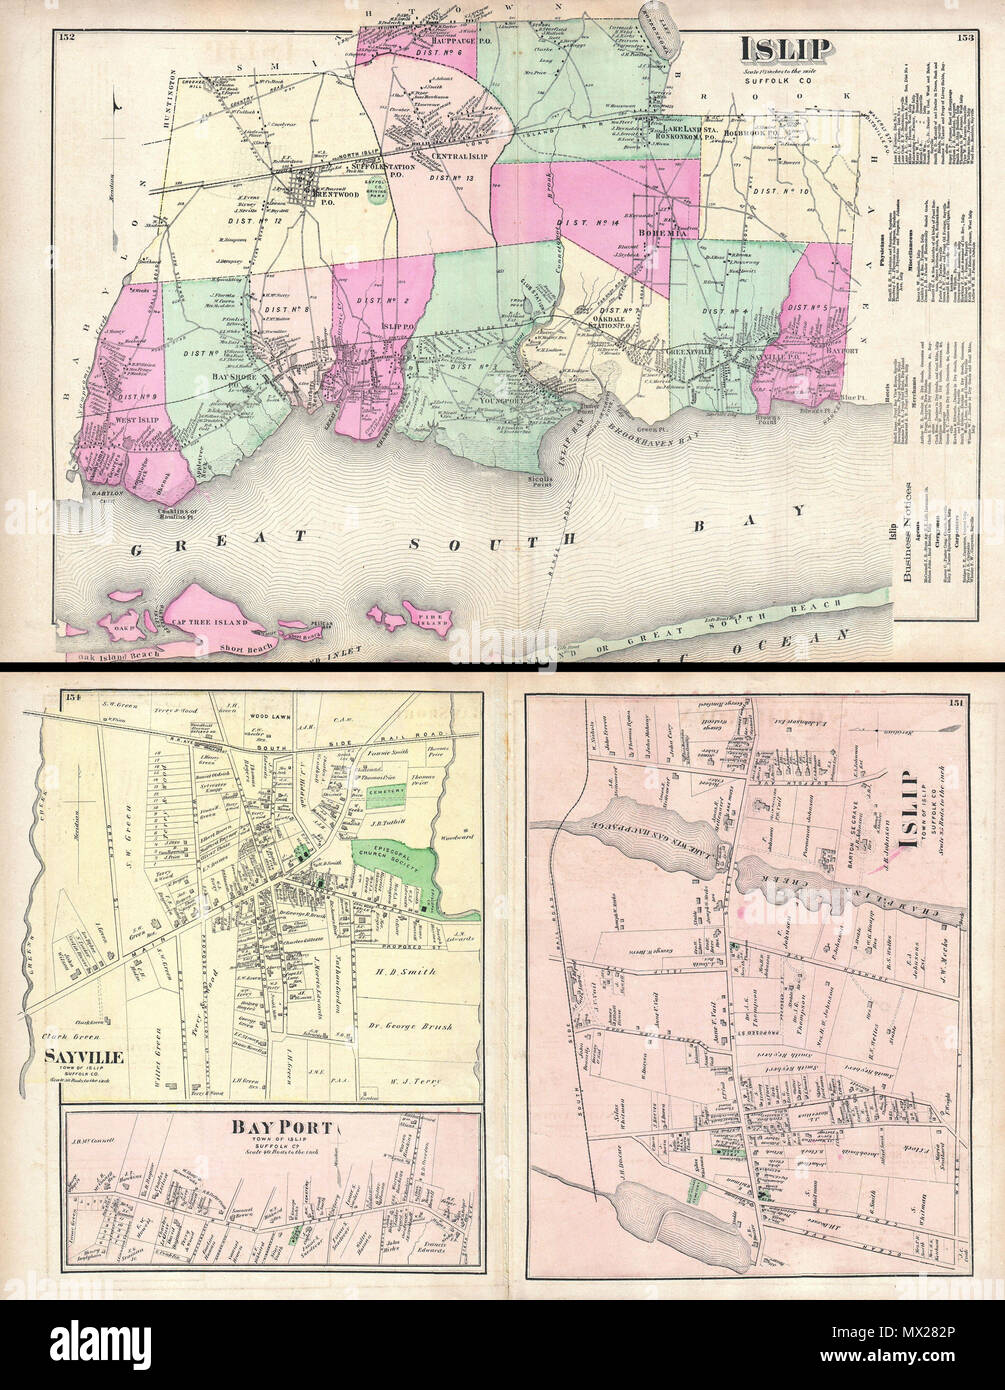 . Islip, Suffolk, Co. - Islip, Town of Islip, Suffold Co. - Bay Port, Town of Islip, Suffold Co. - Sayville, Town of Islip, Suffold Co.  English: A scarce example of Fredrick W. Beers’ map of the Islip and Sayville, Long Island, New York. Published in 1873. Islip side covers from Babylon Cove and West Islip eastward past Bay Shore, Islip, young Point, Oakdale, Greenville to Sayville and Bayport. Includes parts of Oak Island and Fire Island. Notations to the right of the map proper offer business notices. On the verso, sheet is divided into three town plans. These include Islip, Sayville and Ba Stock Photo